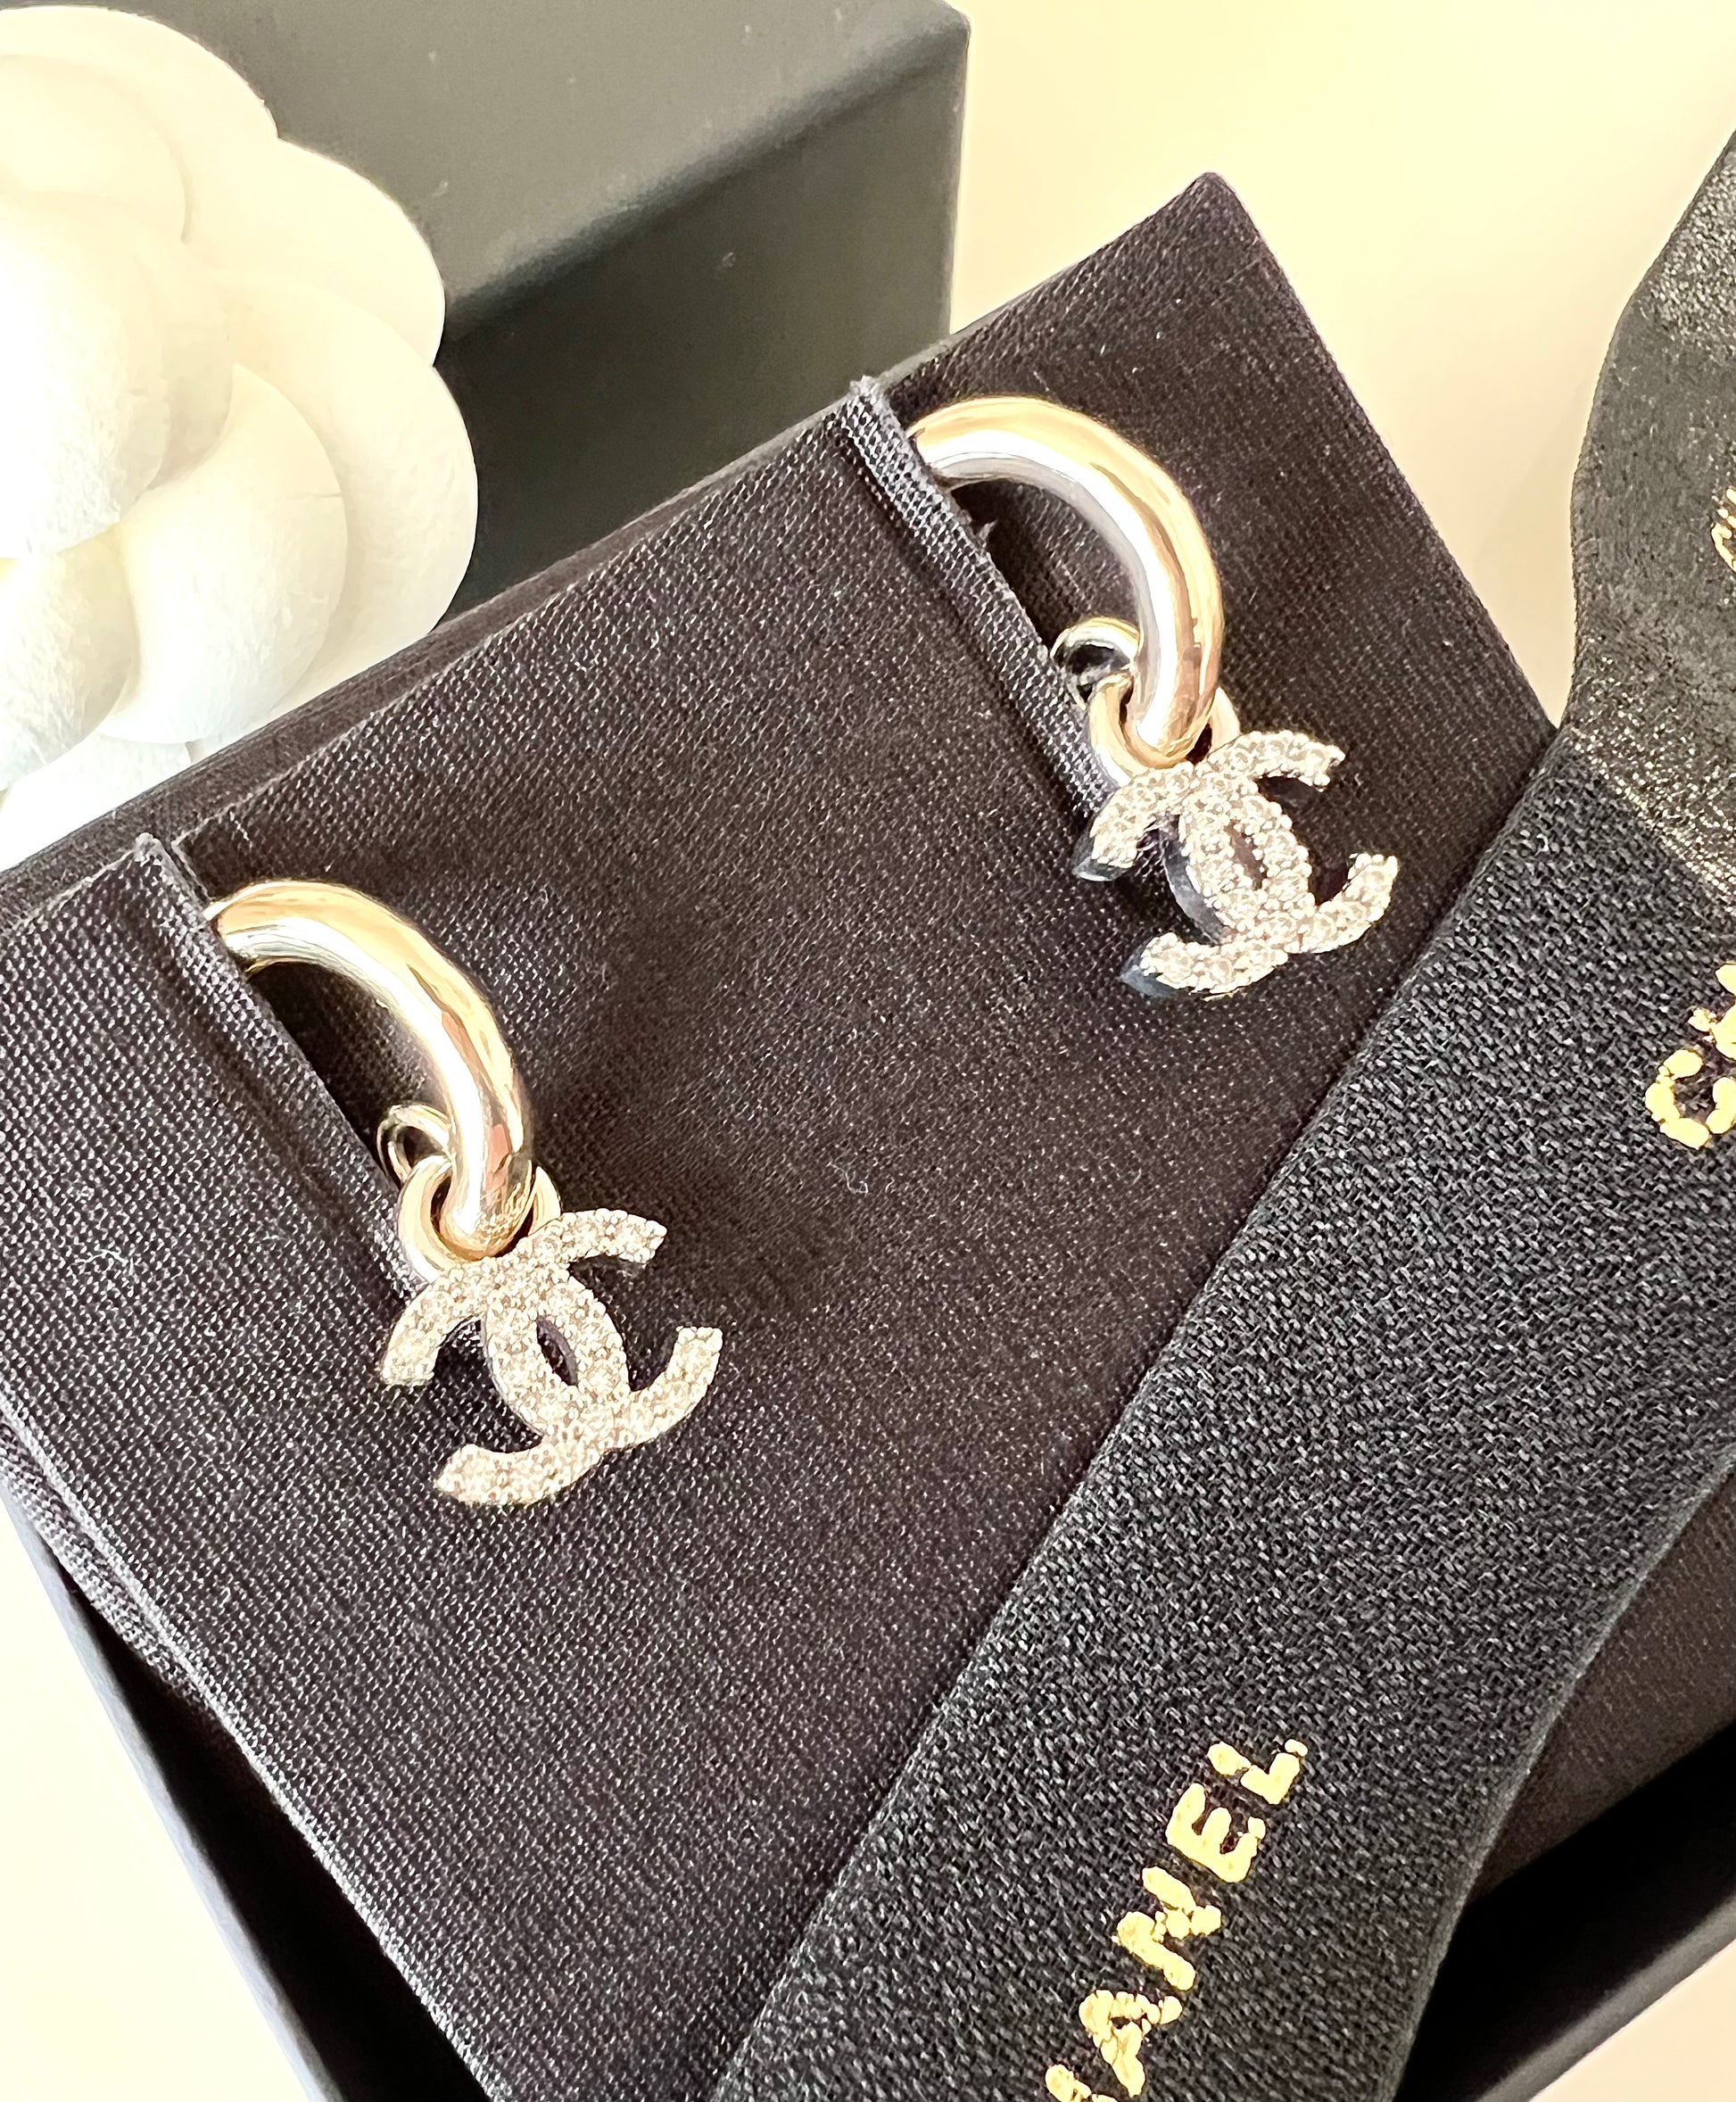 BNIB Chanel 23C Heart long Earrings with Crystals Light Gold